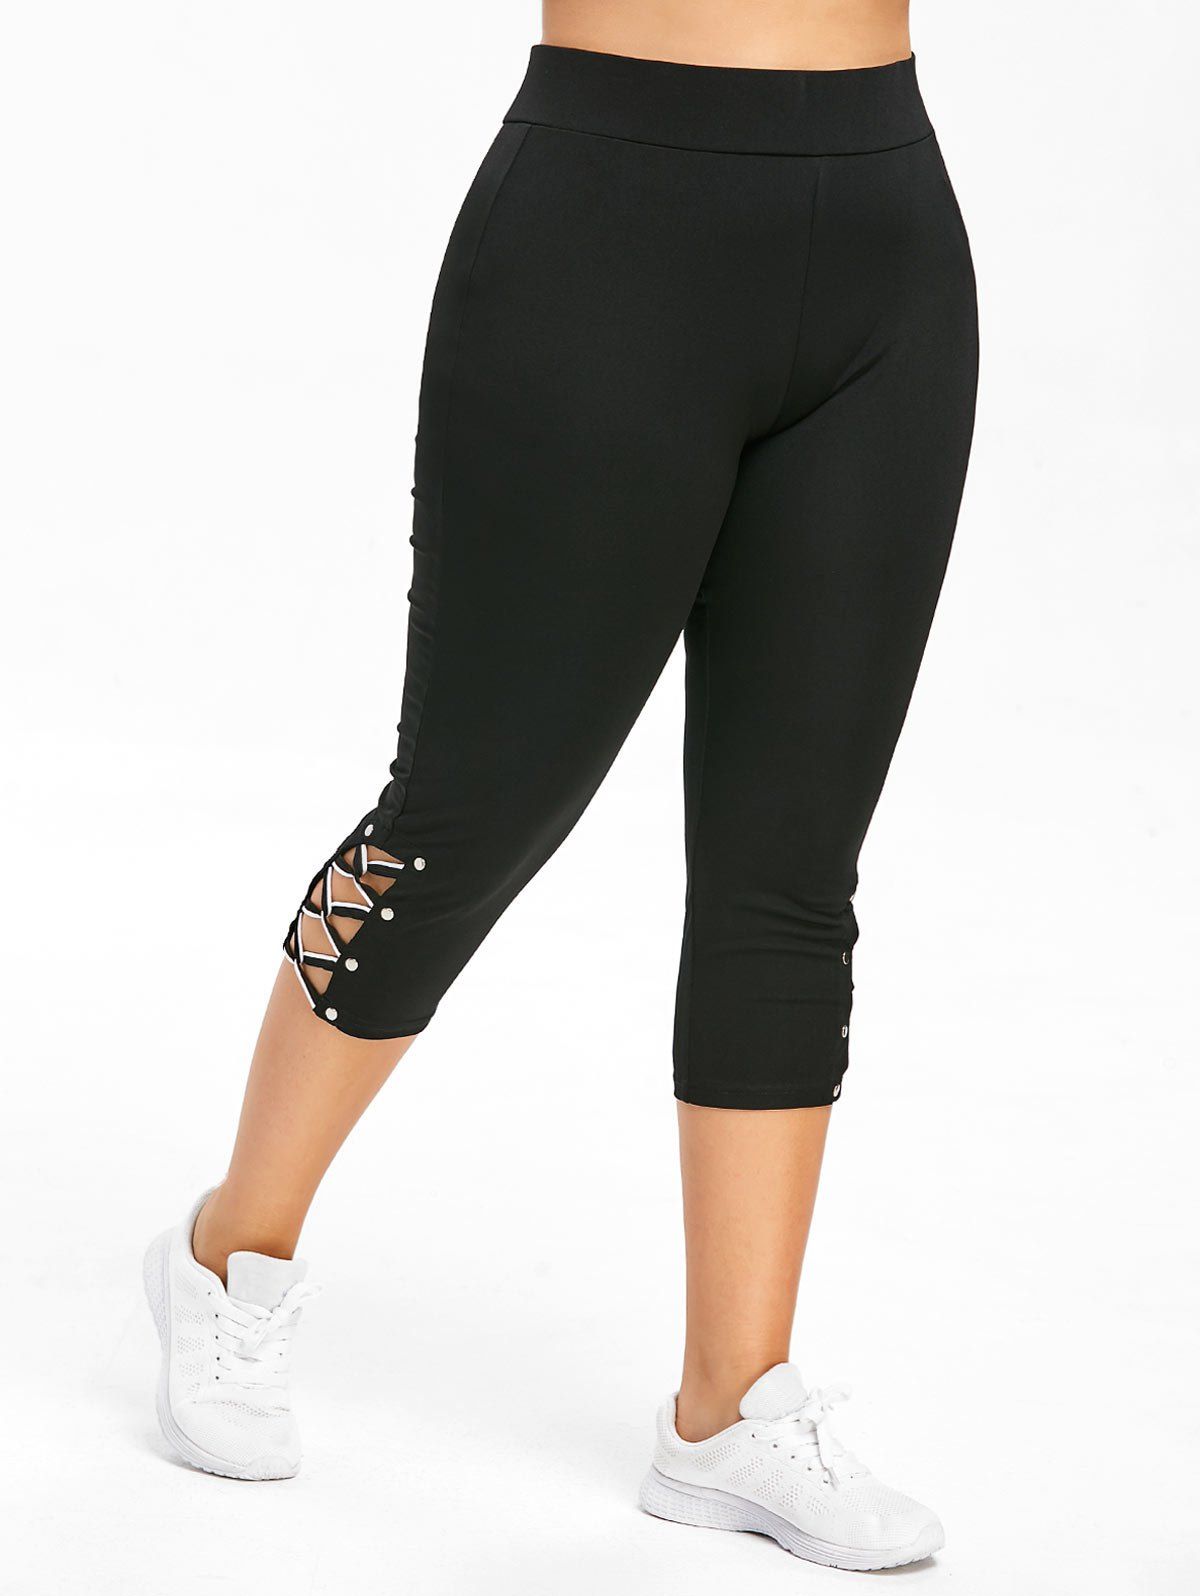  MOREFEEL Plus Size Capri Leggings for Women-Stretchy X-Large-4X Tummy  Control High Waist Spandex Workout Black Yoga Pants : Clothing, Shoes &  Jewelry